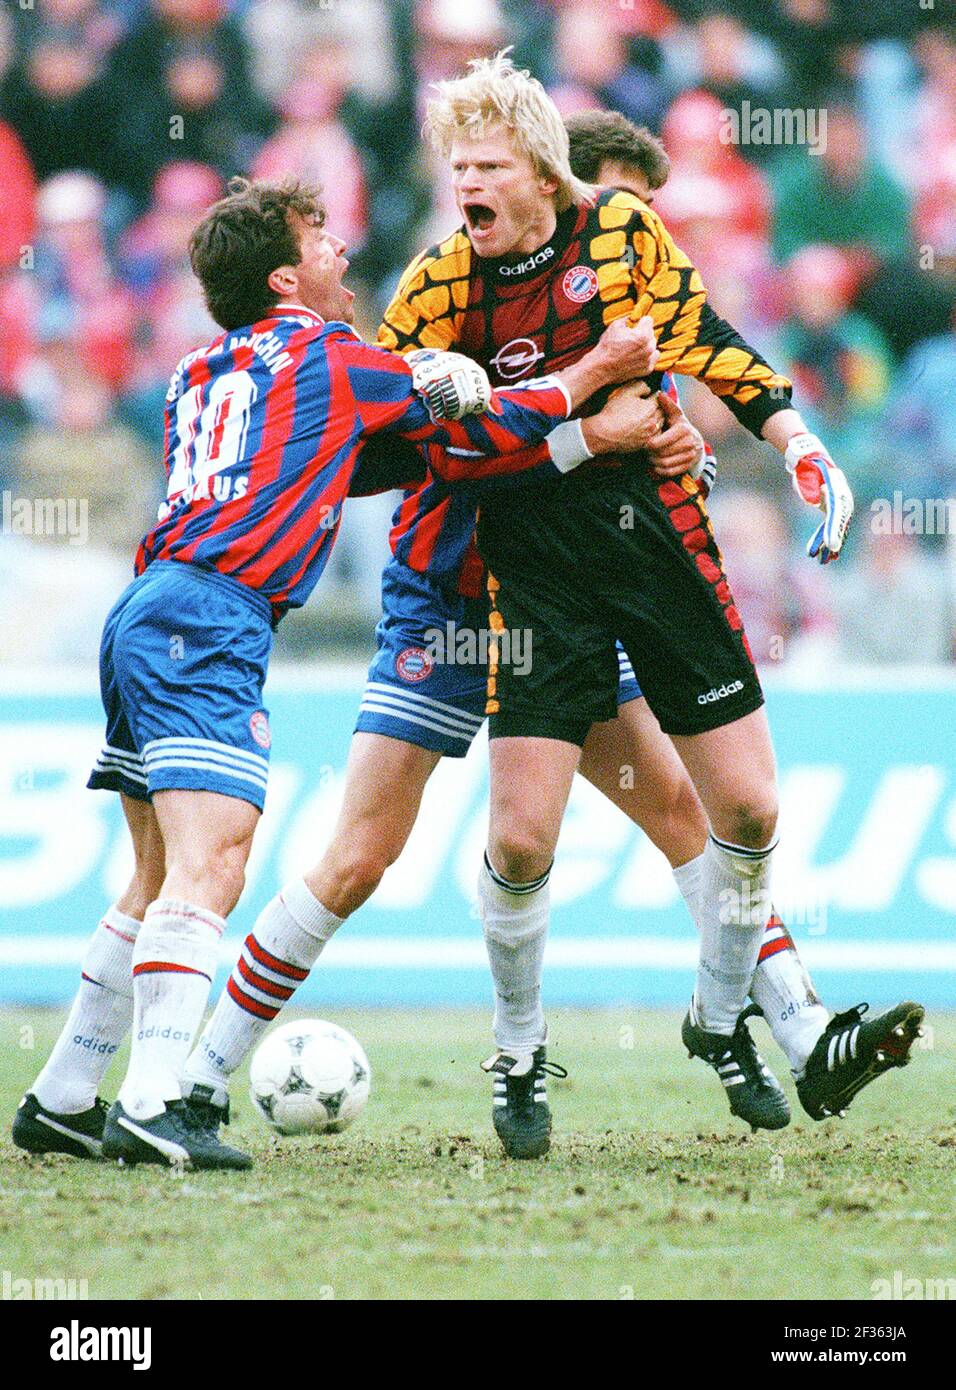 Lothar Matthaeus will celebrate his 60th birthday on March 21, 2021.  Archive photo: Oliver KAHN, goalwart goalhueter FC Bayern Munich, rages  with anger about a decision, completely beside himself, angry, outburst of